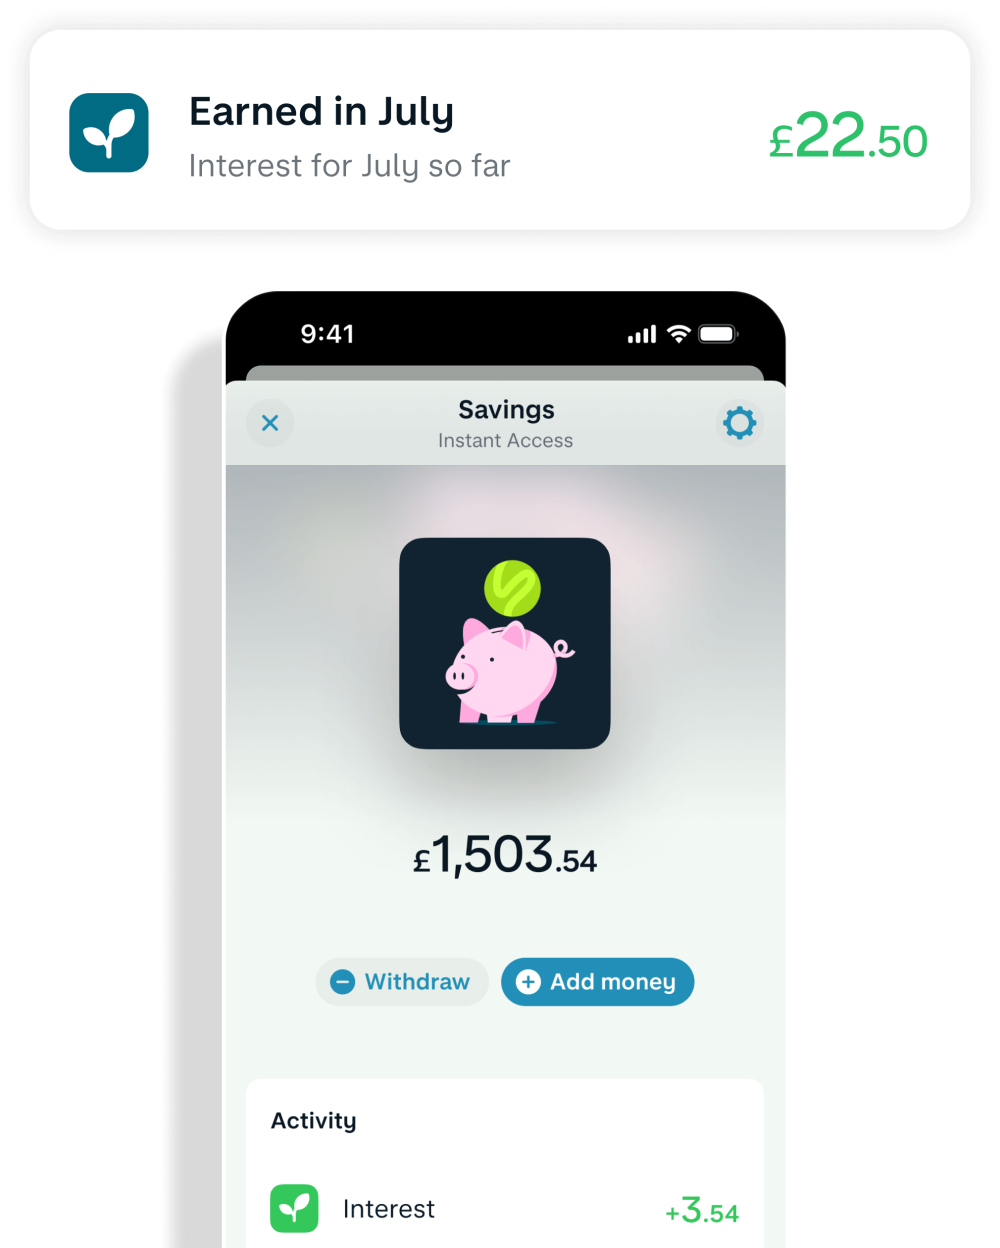 Interest notification showing £22.50 interest earned in July. Below this is a Monzo instant access savings pot with the balance of £1,503.54.